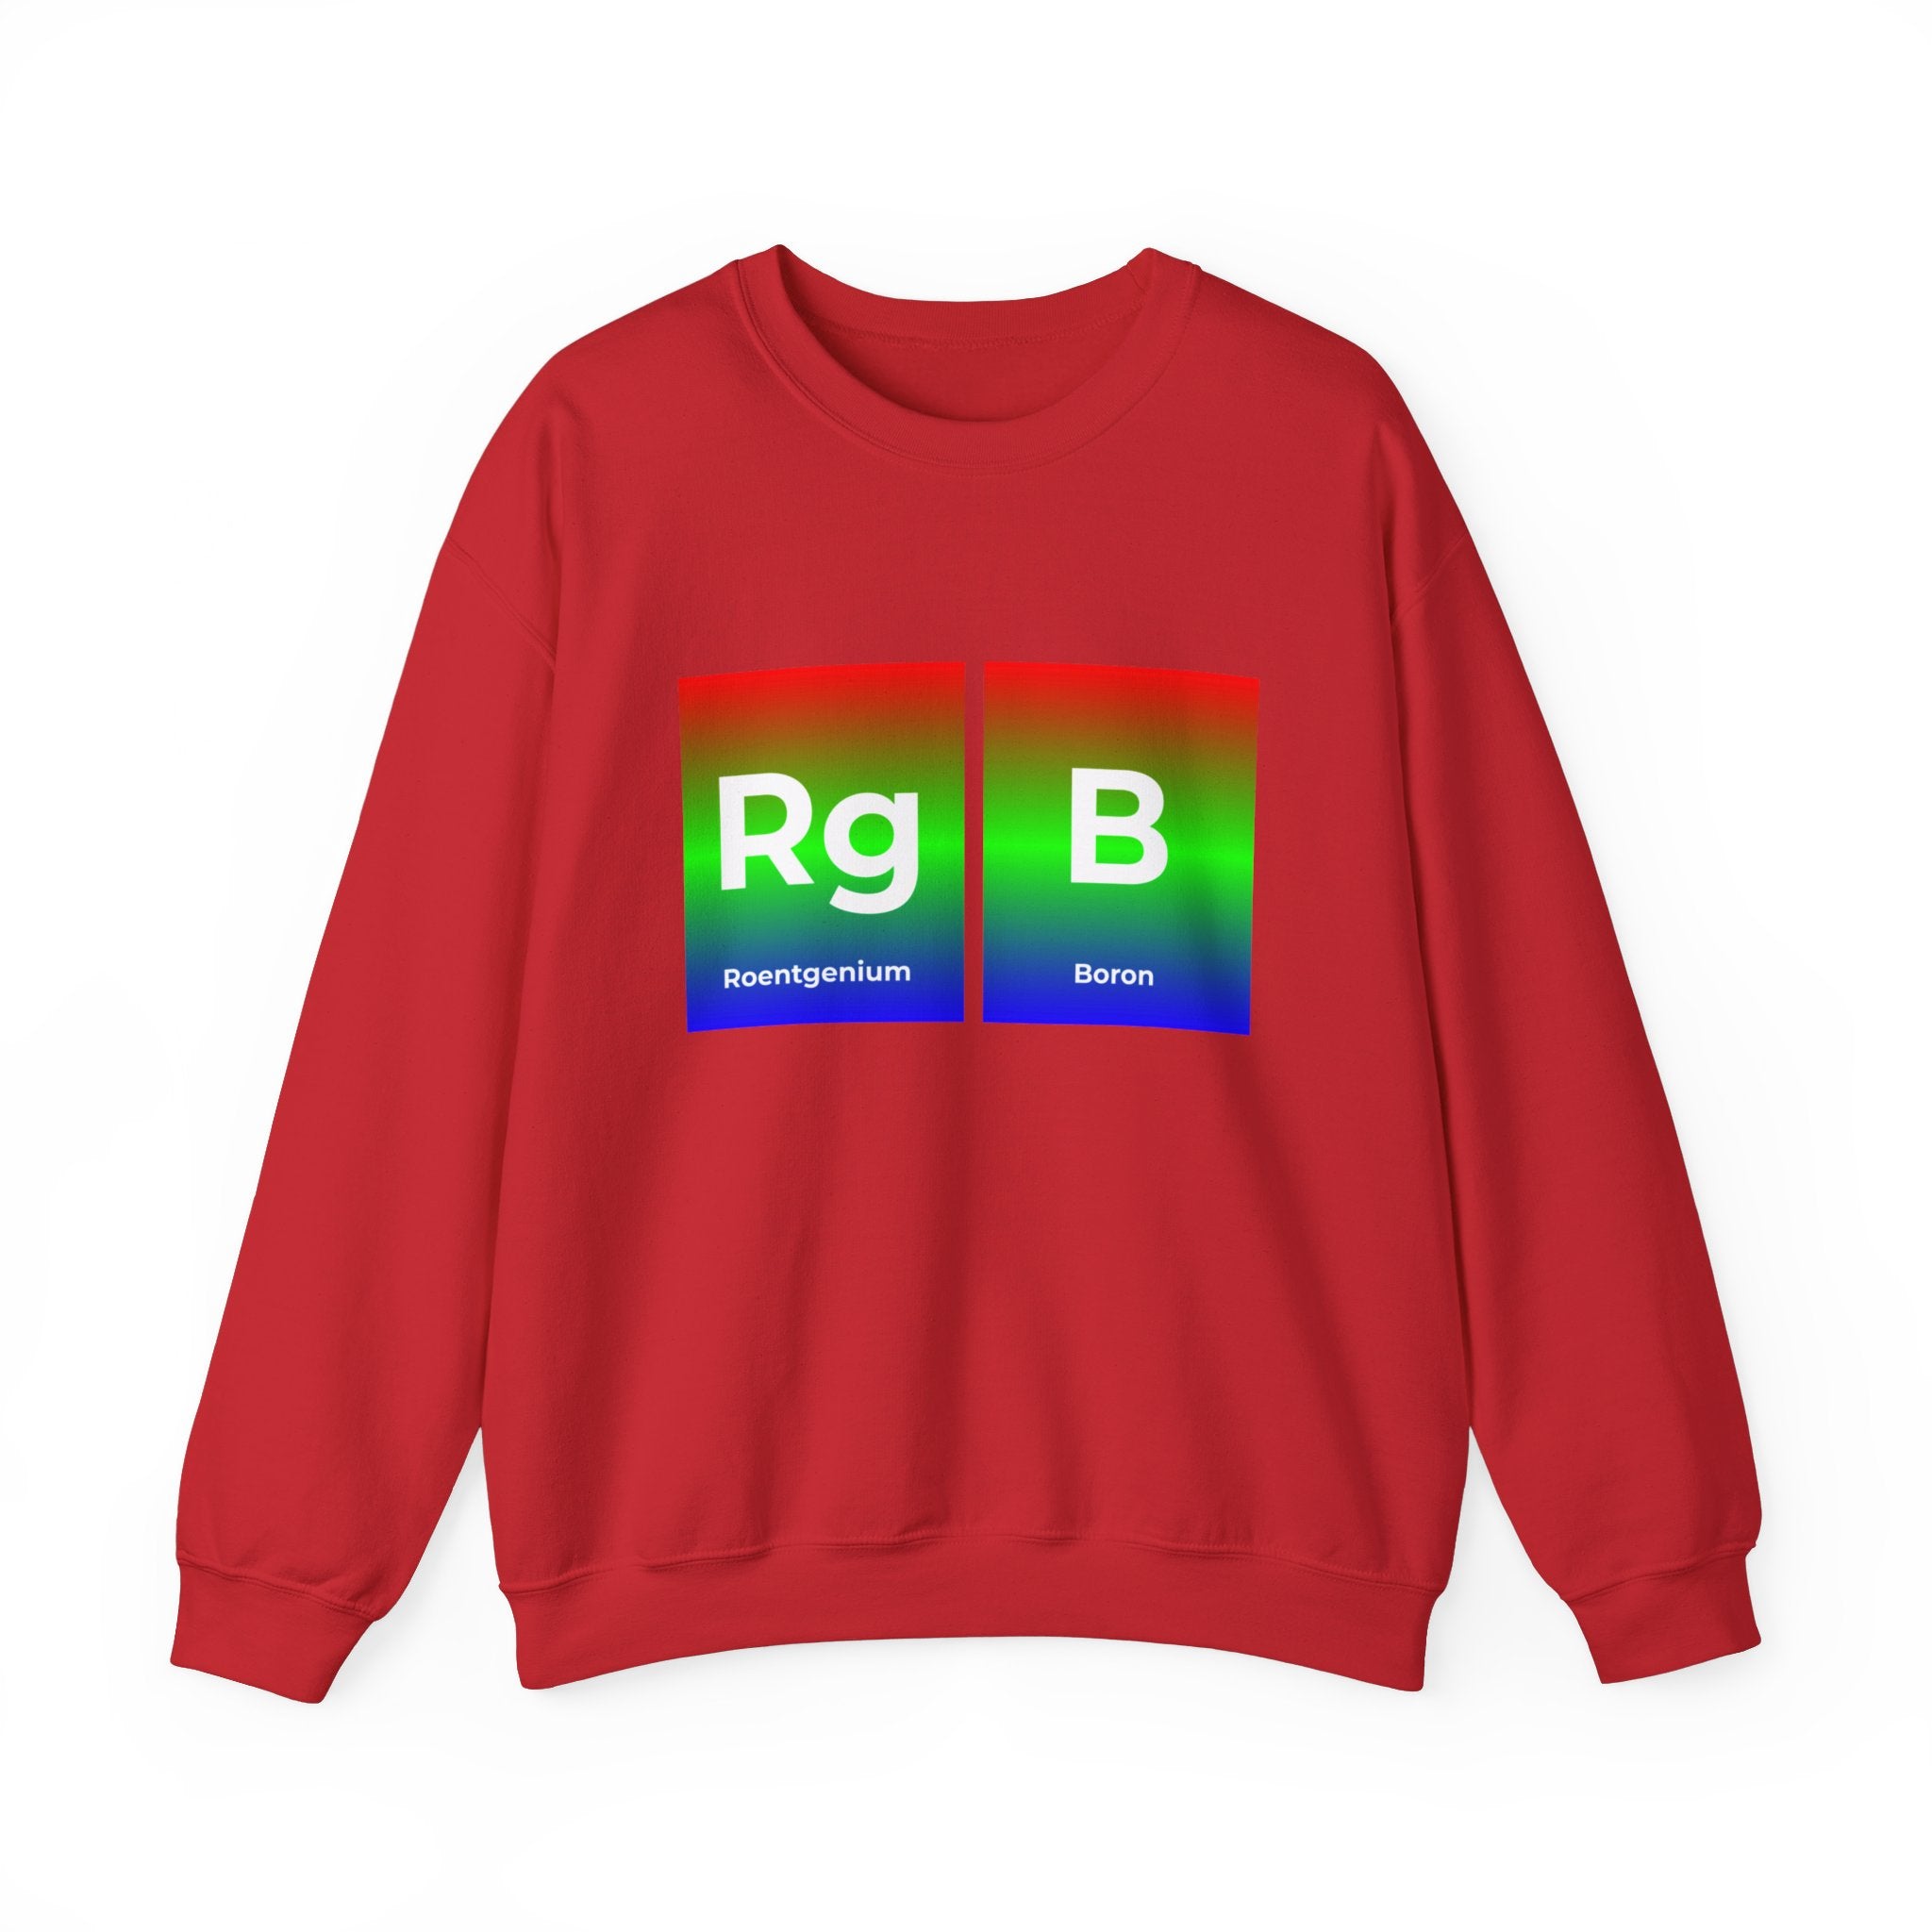 A cozy RG-B - Sweatshirt featuring two pixelated periodic table elements, "Rg" for Roentgenium and "B" for Boron, with a gradient background of red, green, and blue.